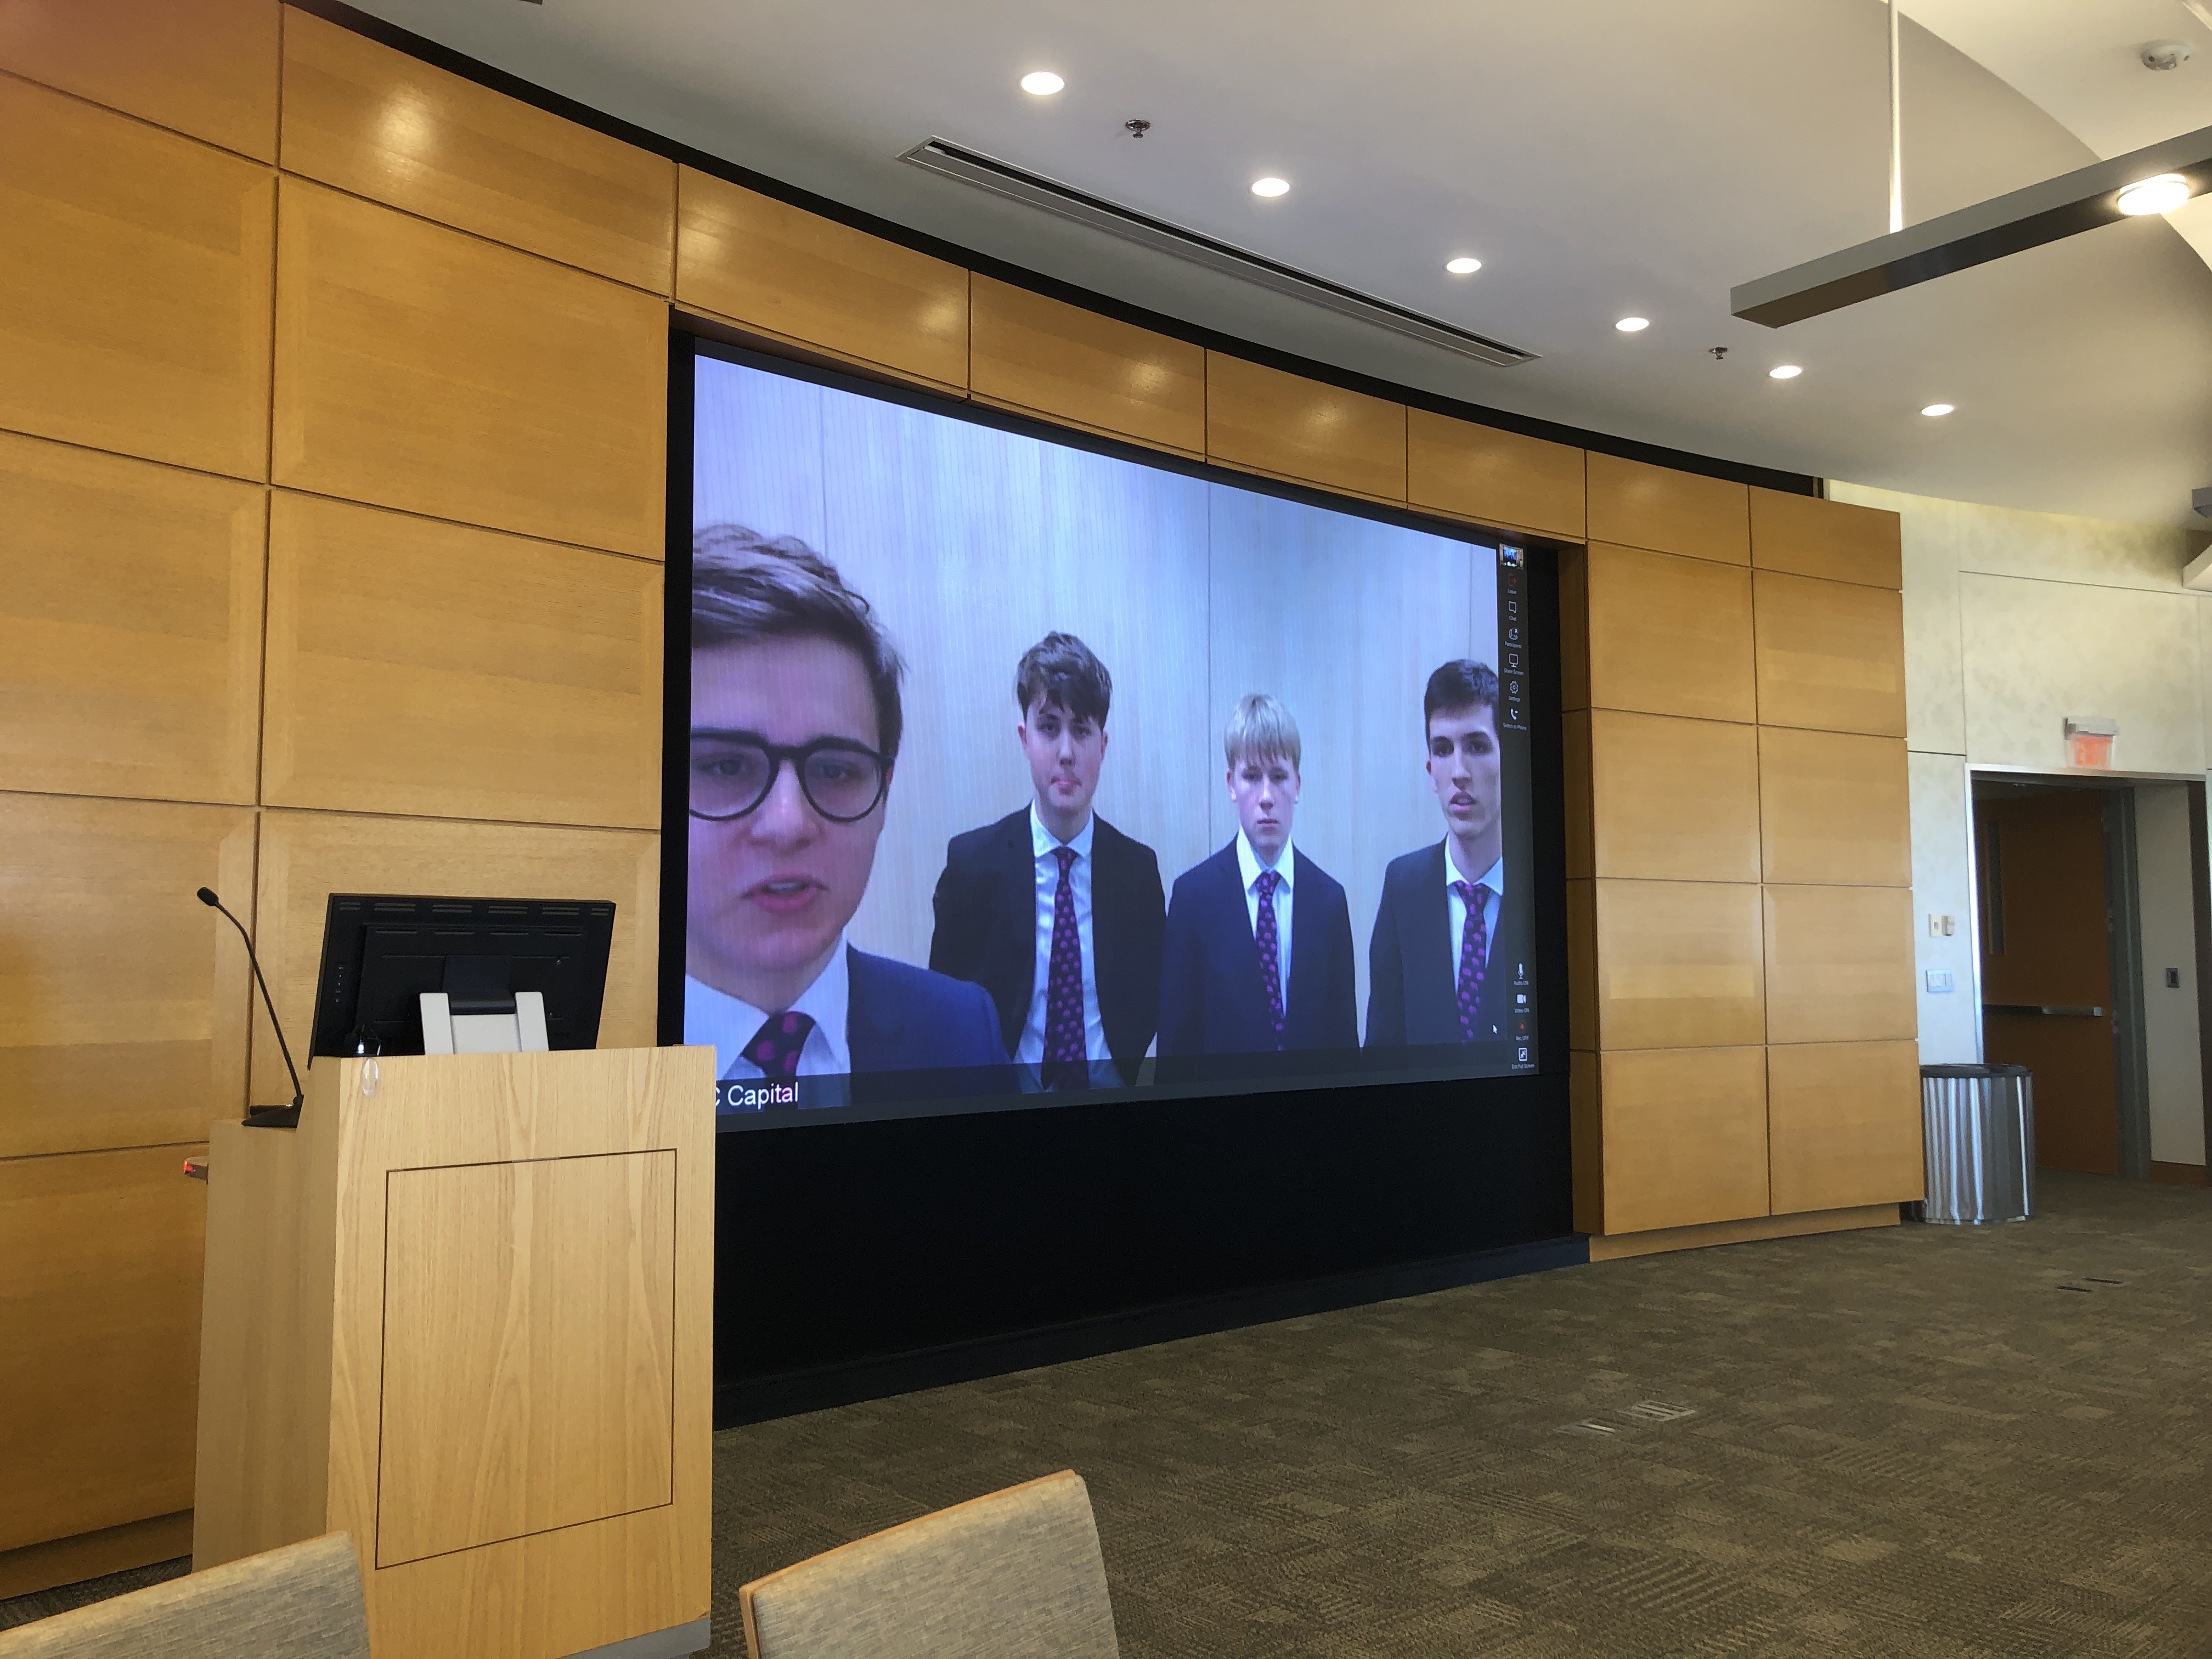 DC Invests of Dulwich College in the U.K., which presented by videoconference on March 16, is the KWHS team Wildcard pick to compete in the Global Finale.